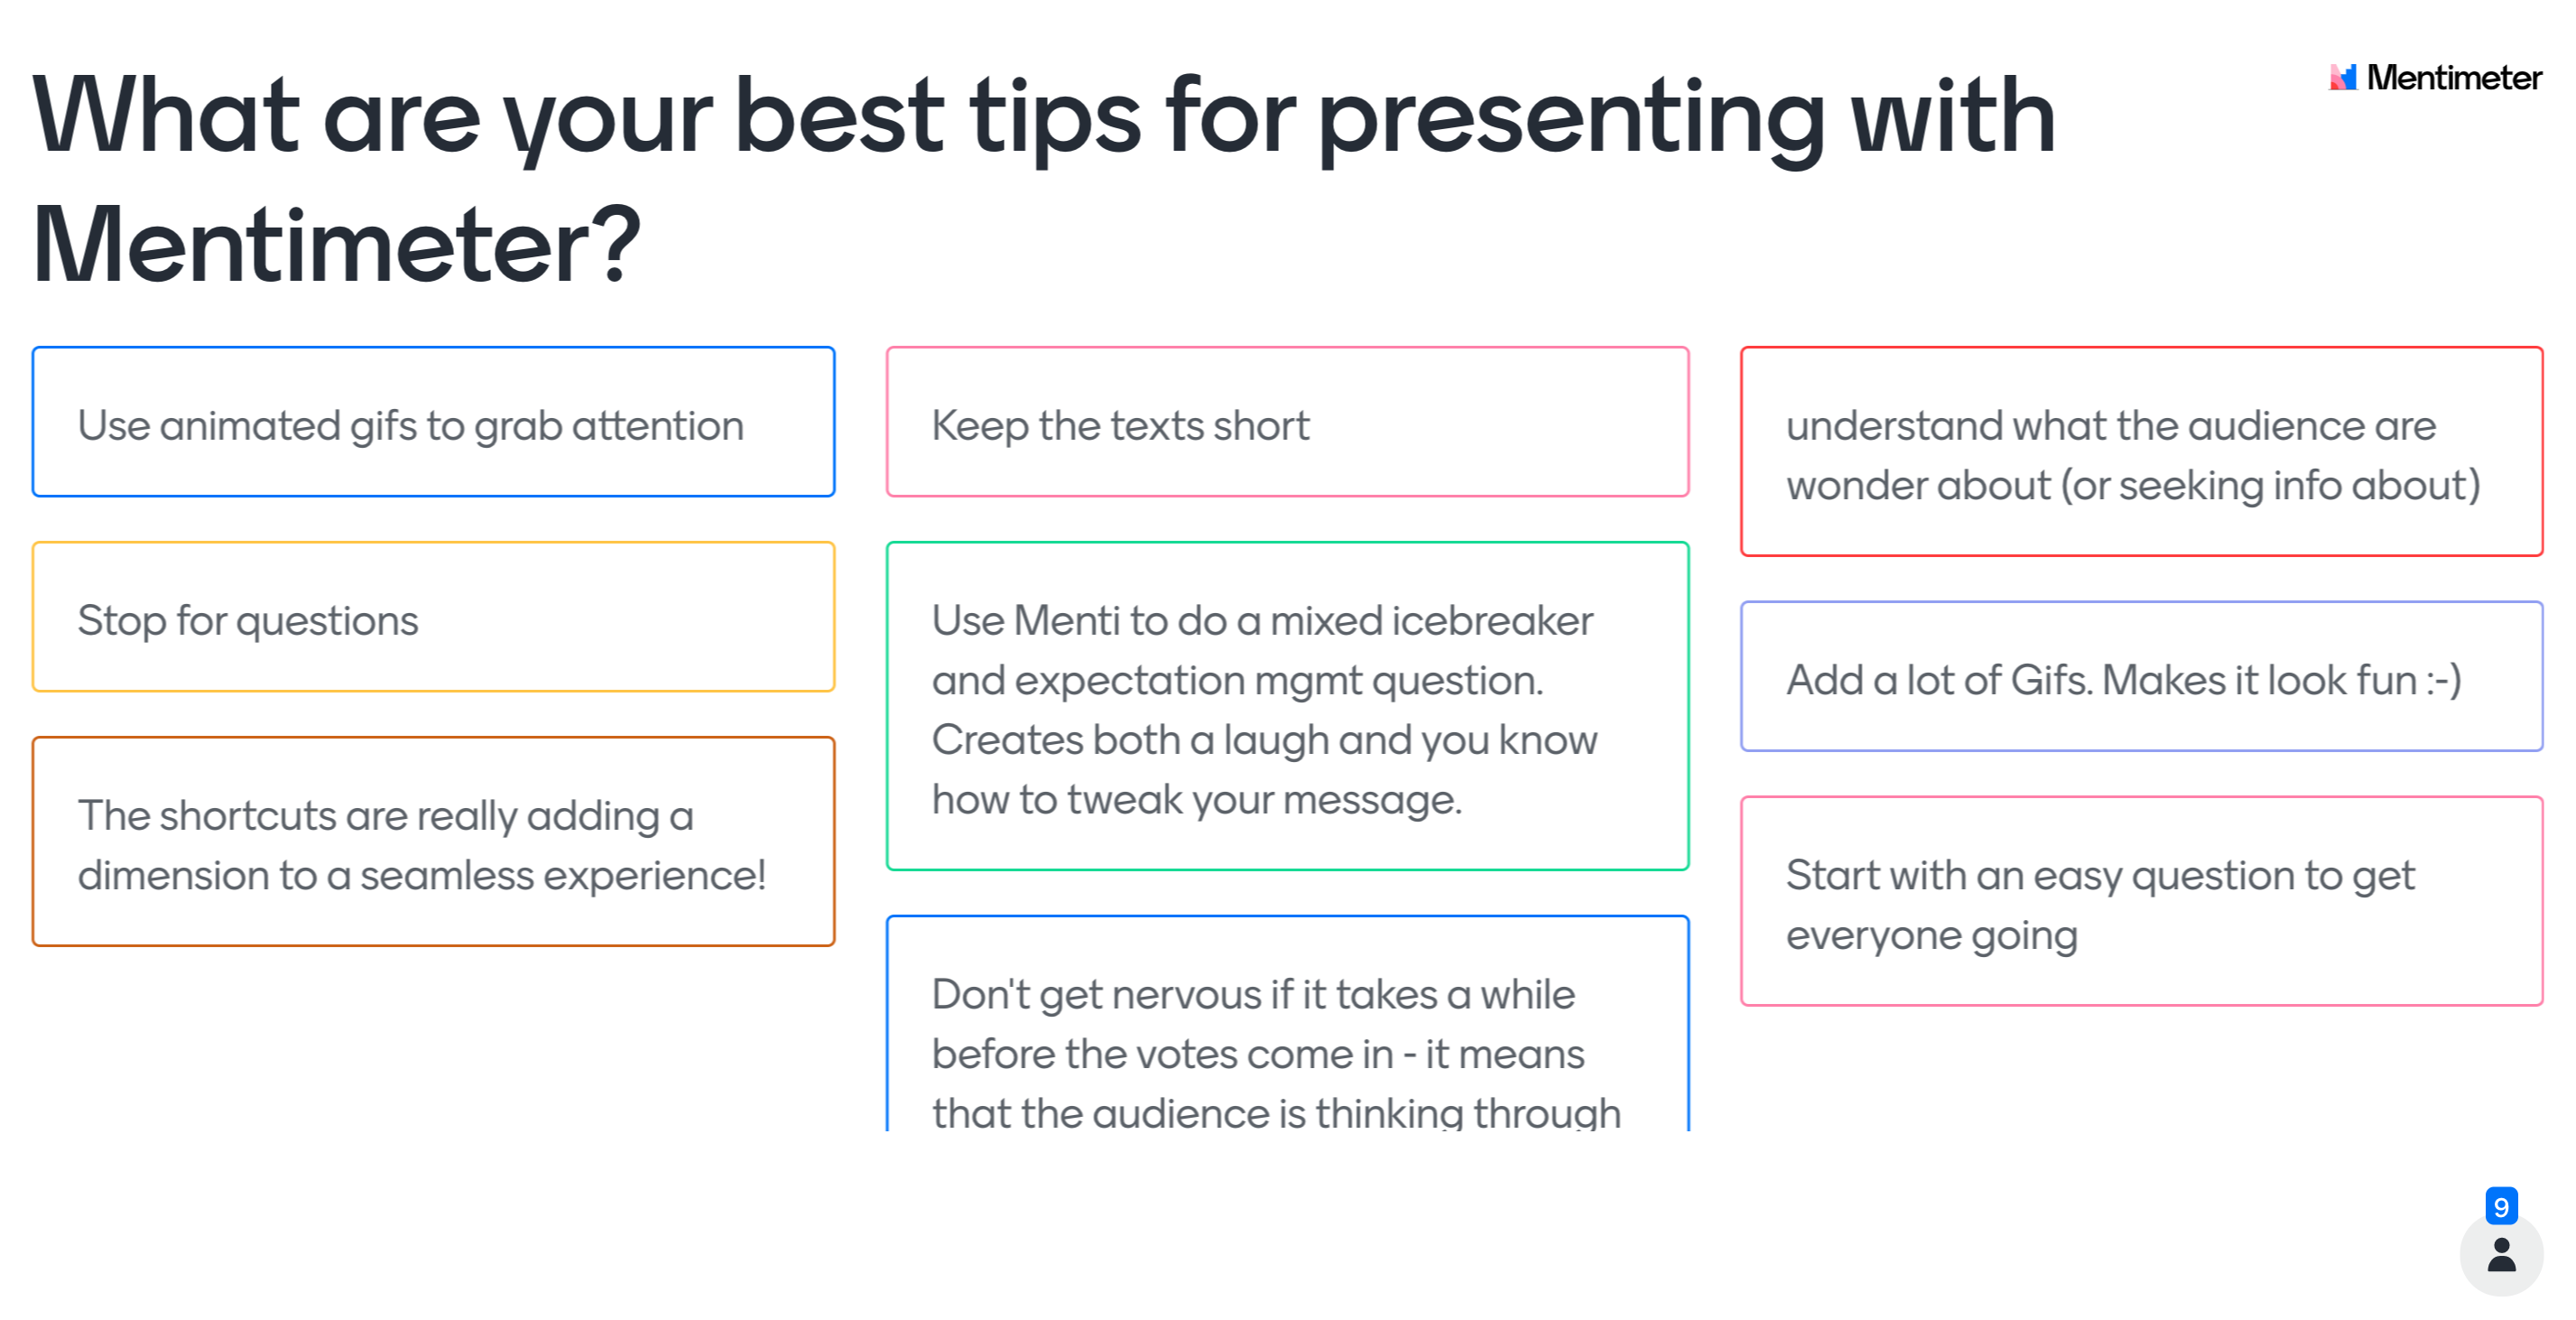 What are your best tips for presenting with Mentimeter?